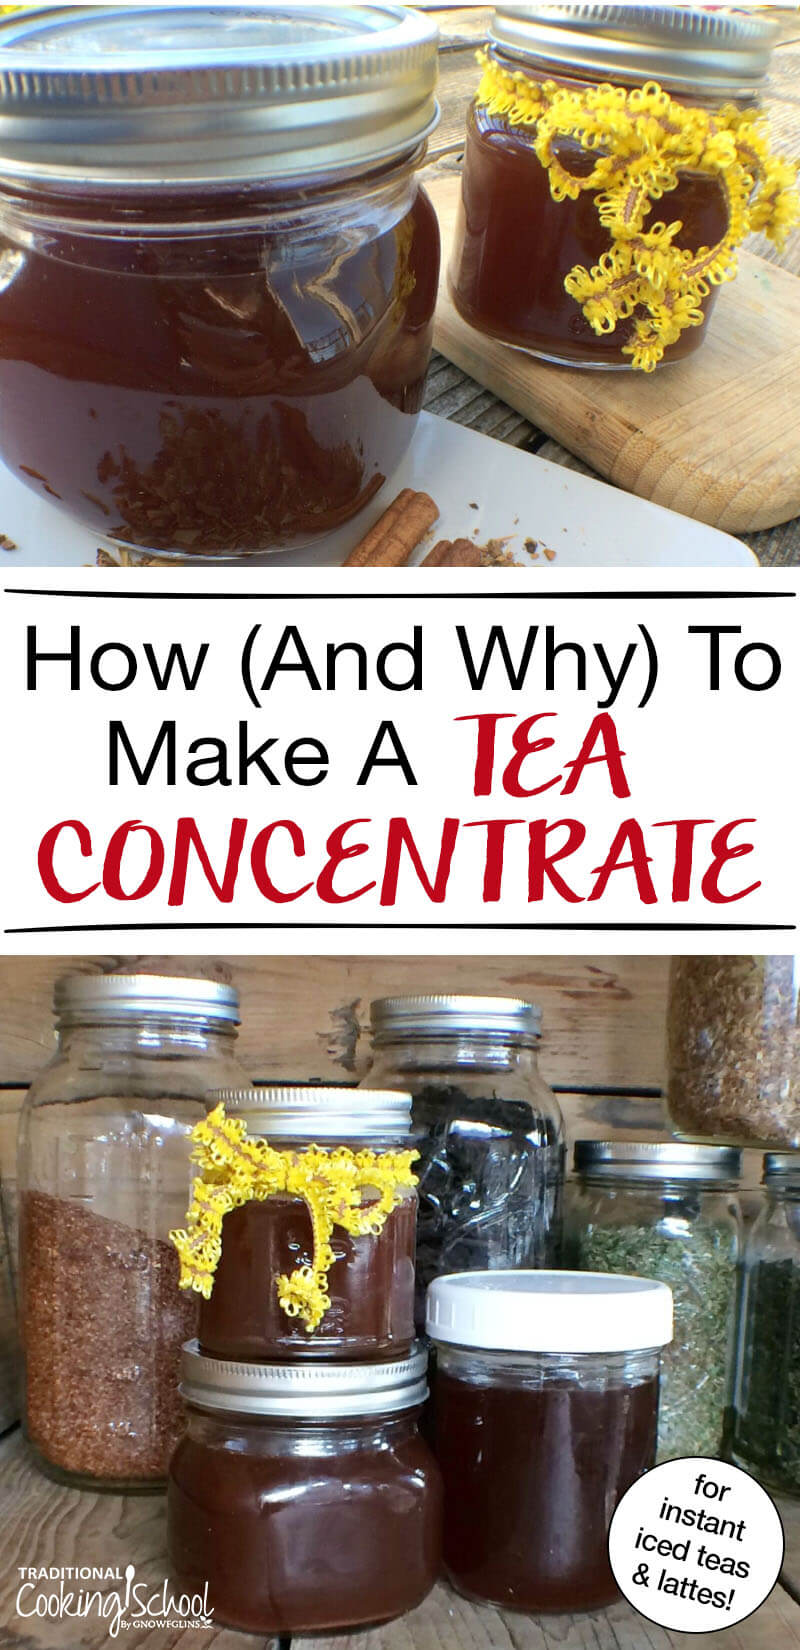 How {and Why} to Make a Tea Concentrate | The tradition of making tea concentrates is centuries old. This time of year, cold weather provides an excellent excuse to cozy in and give your body something hot, soothing, and healthy: a well-loved tea. Let's explore the many reasons why you'd want to make a tea concentrate, and then I'll teach you how to do it! | TraditionalCookingSchool.com